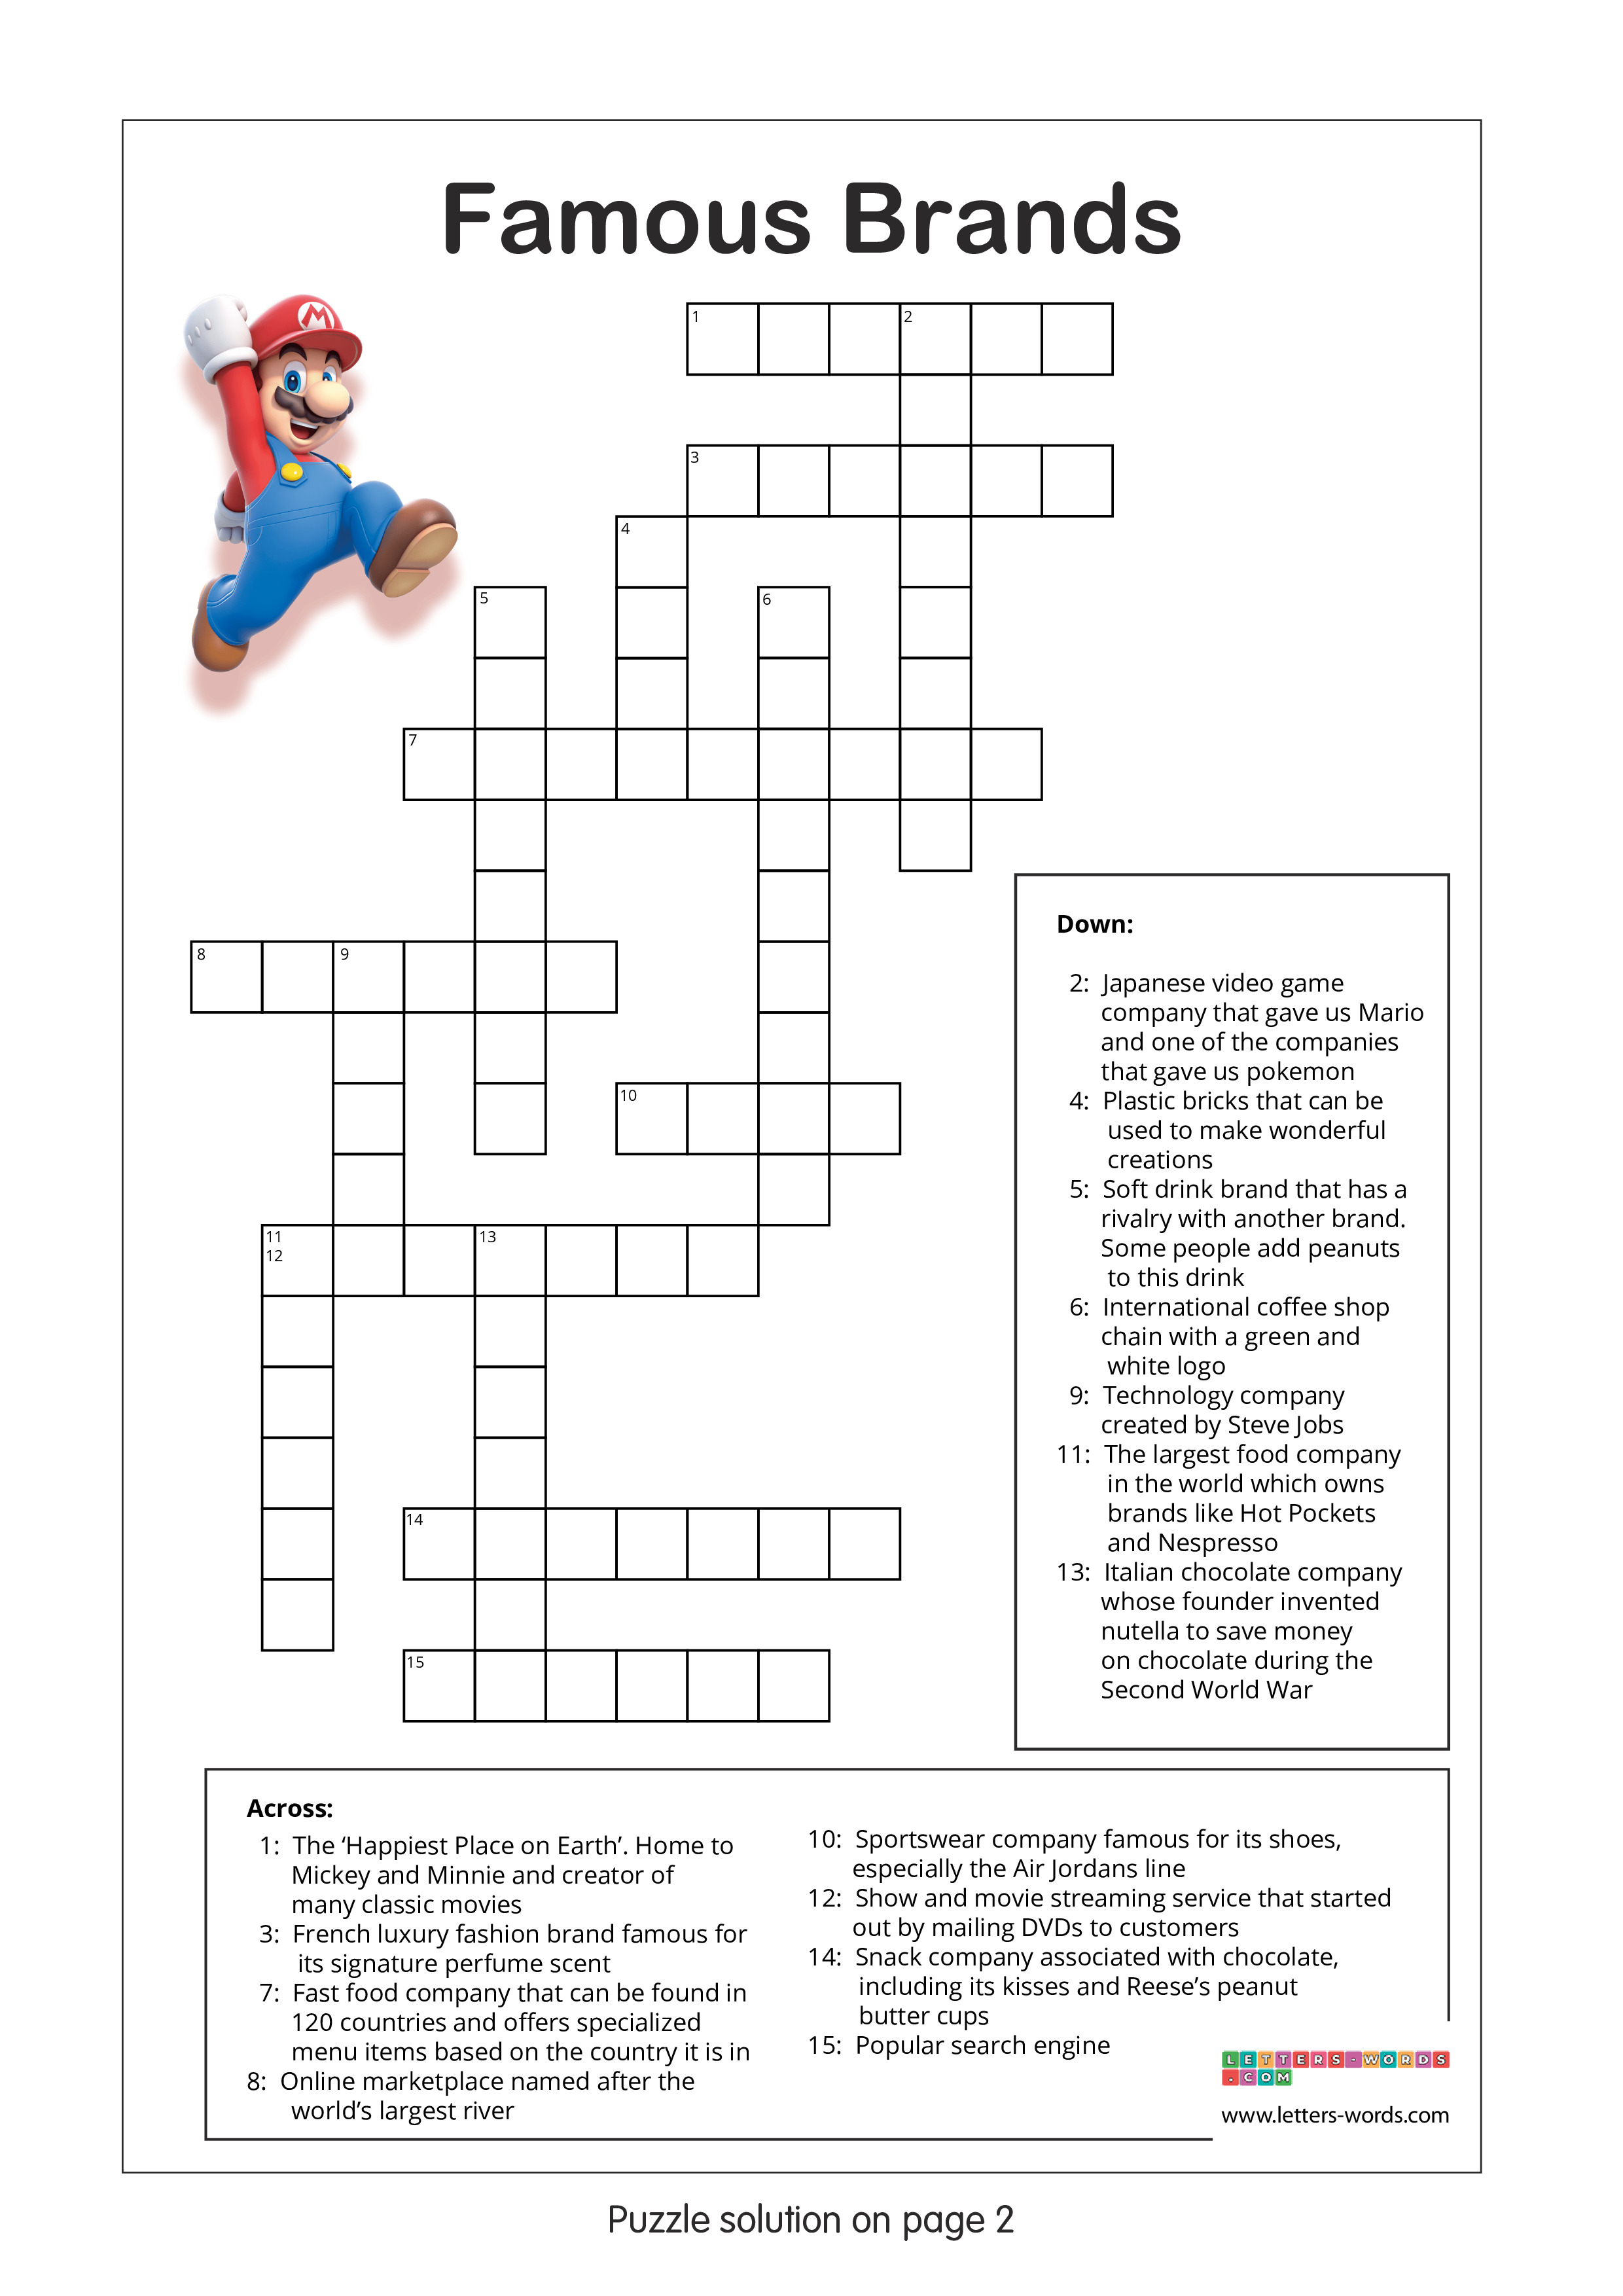 Crossword puzzles for children aged 10+ - Famous Brands